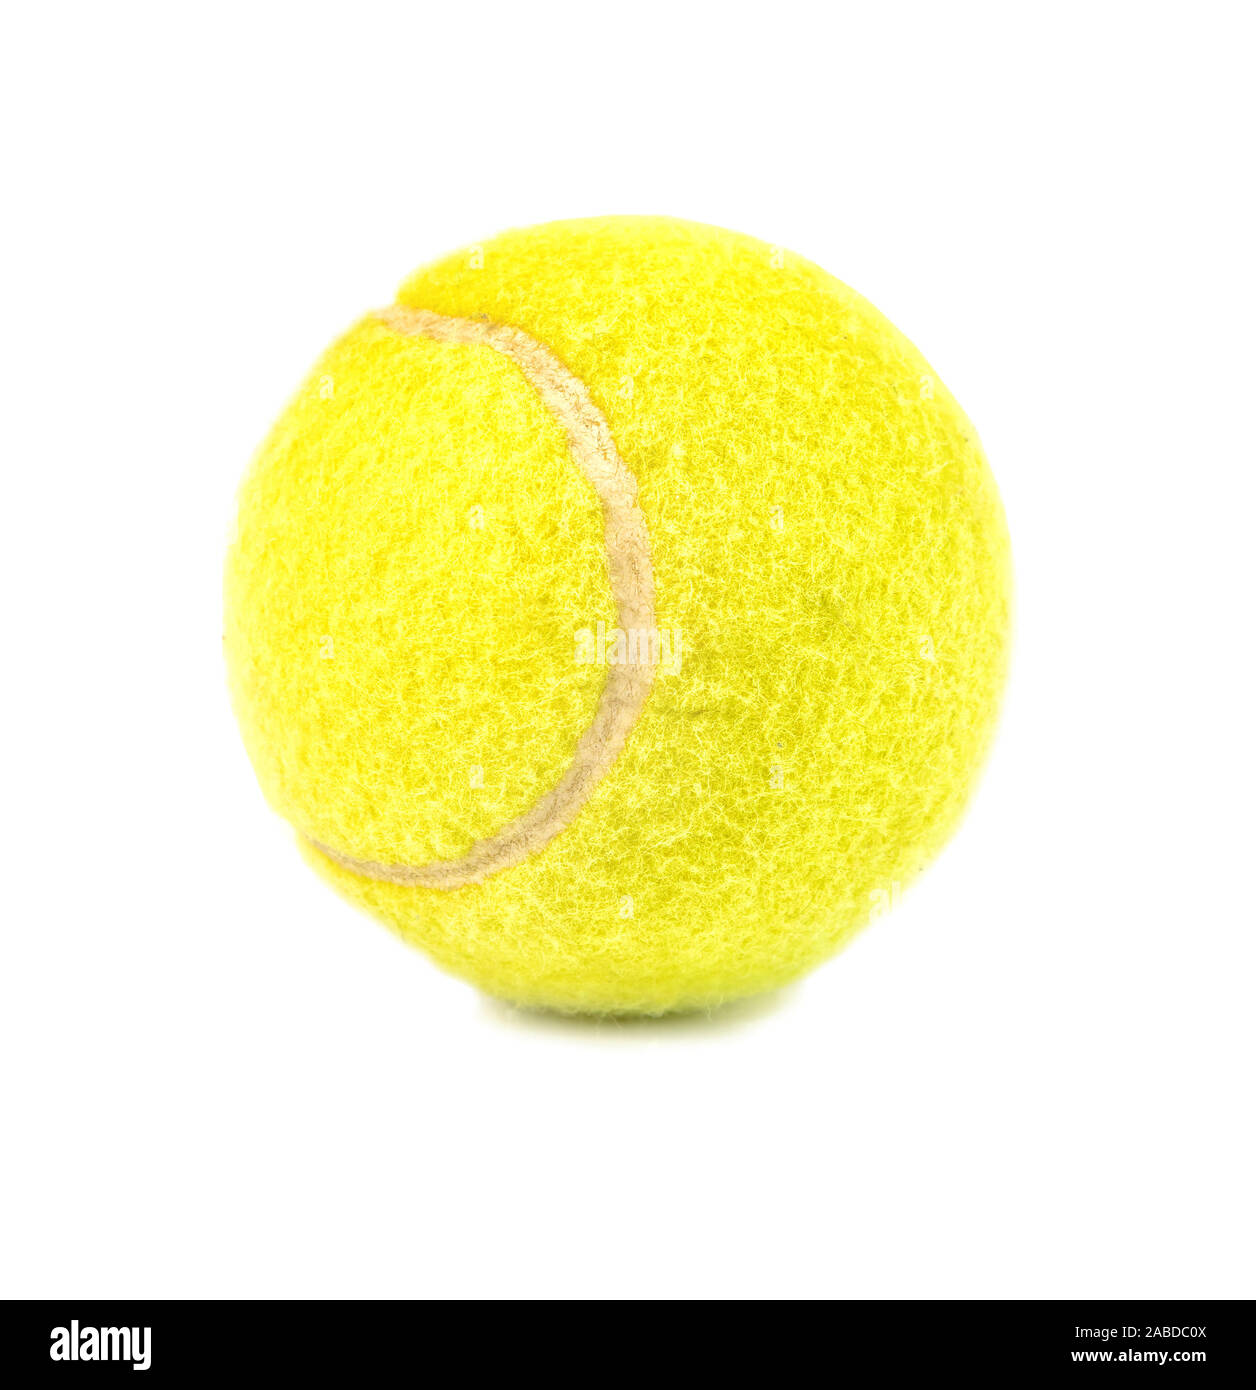 Tennis ball isolated on white background Stock Photo